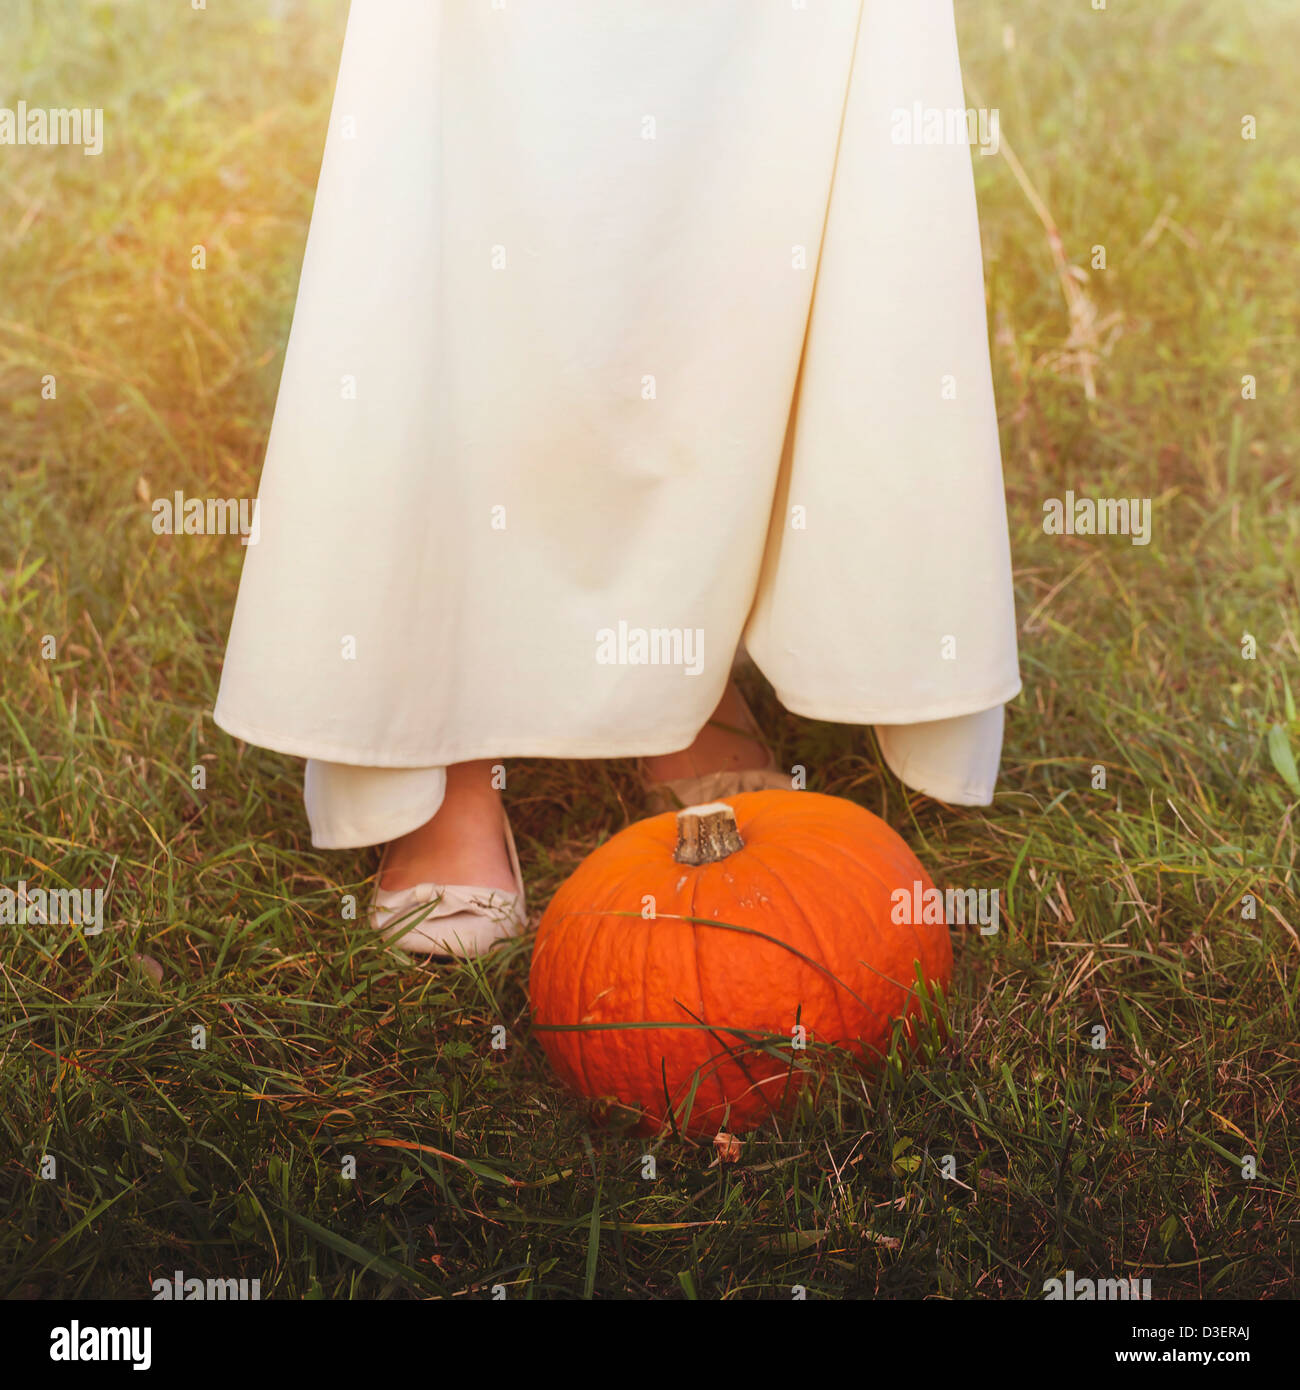 a pumpkin in the grass in front of a woman in a white dress Stock Photo